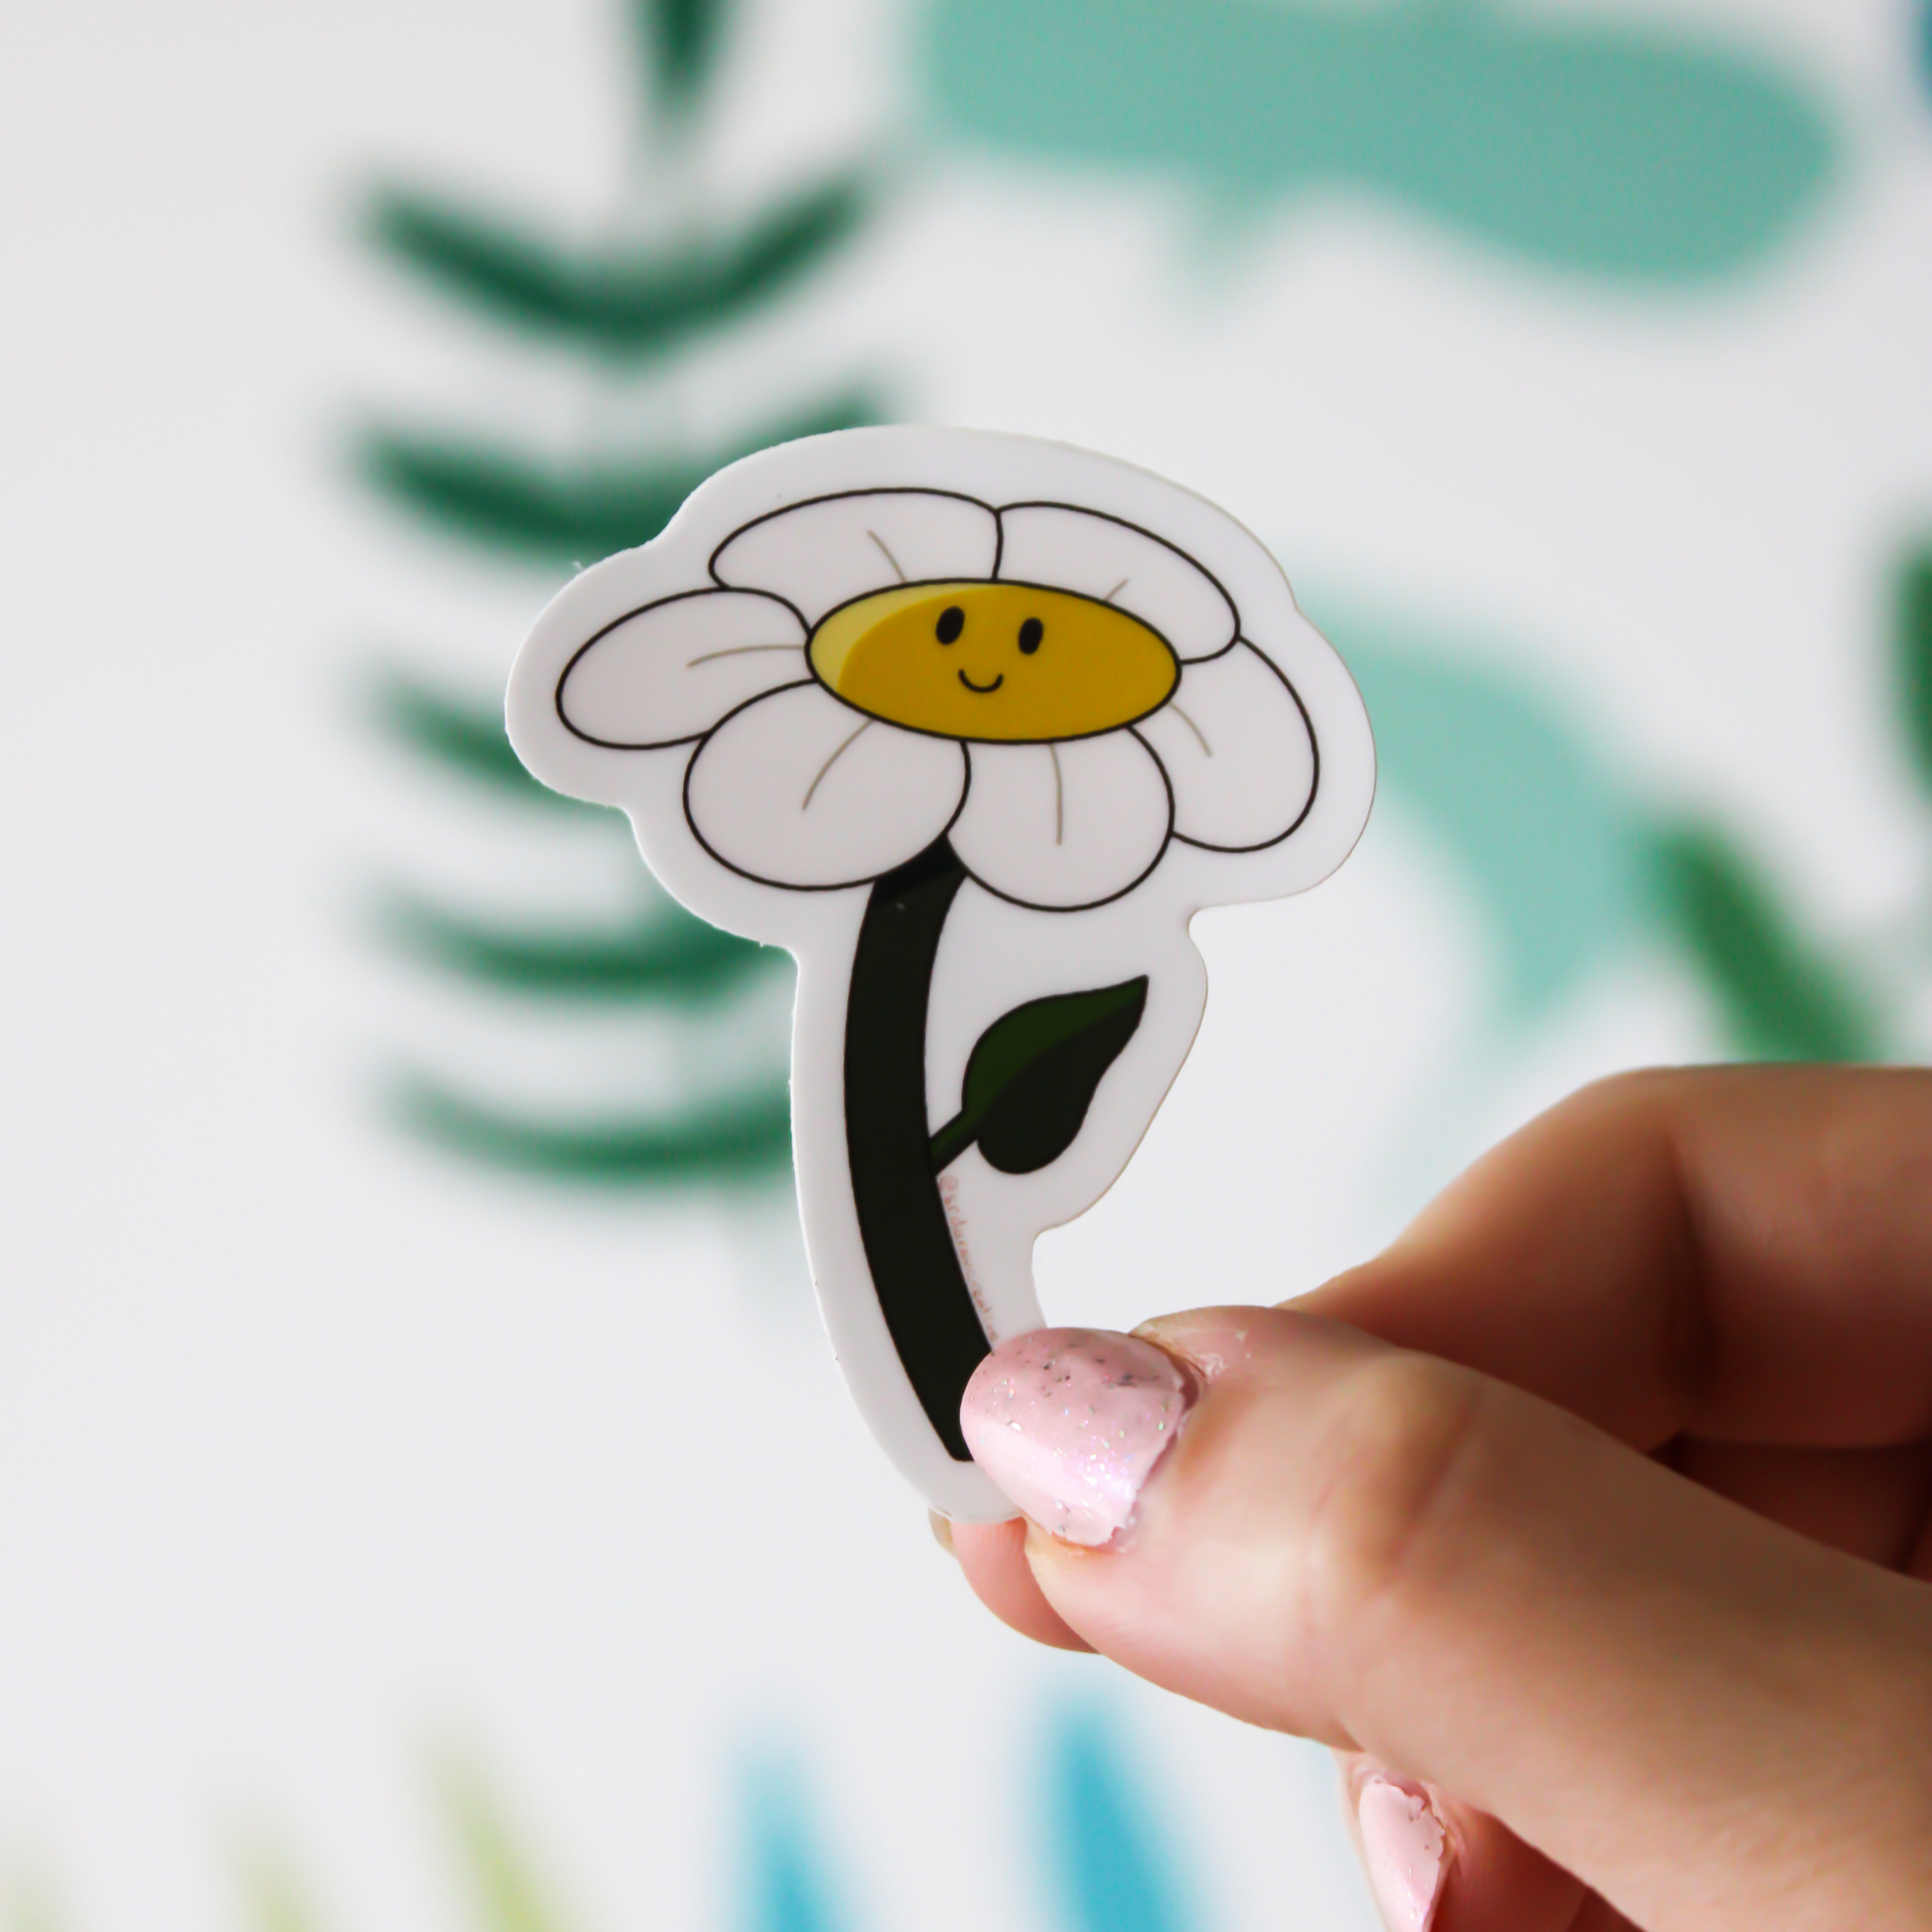 A blurred leaf background. In front is a hand holding a flower sticker with white petals, a yellow centre with a smiling face and a dark green stem.